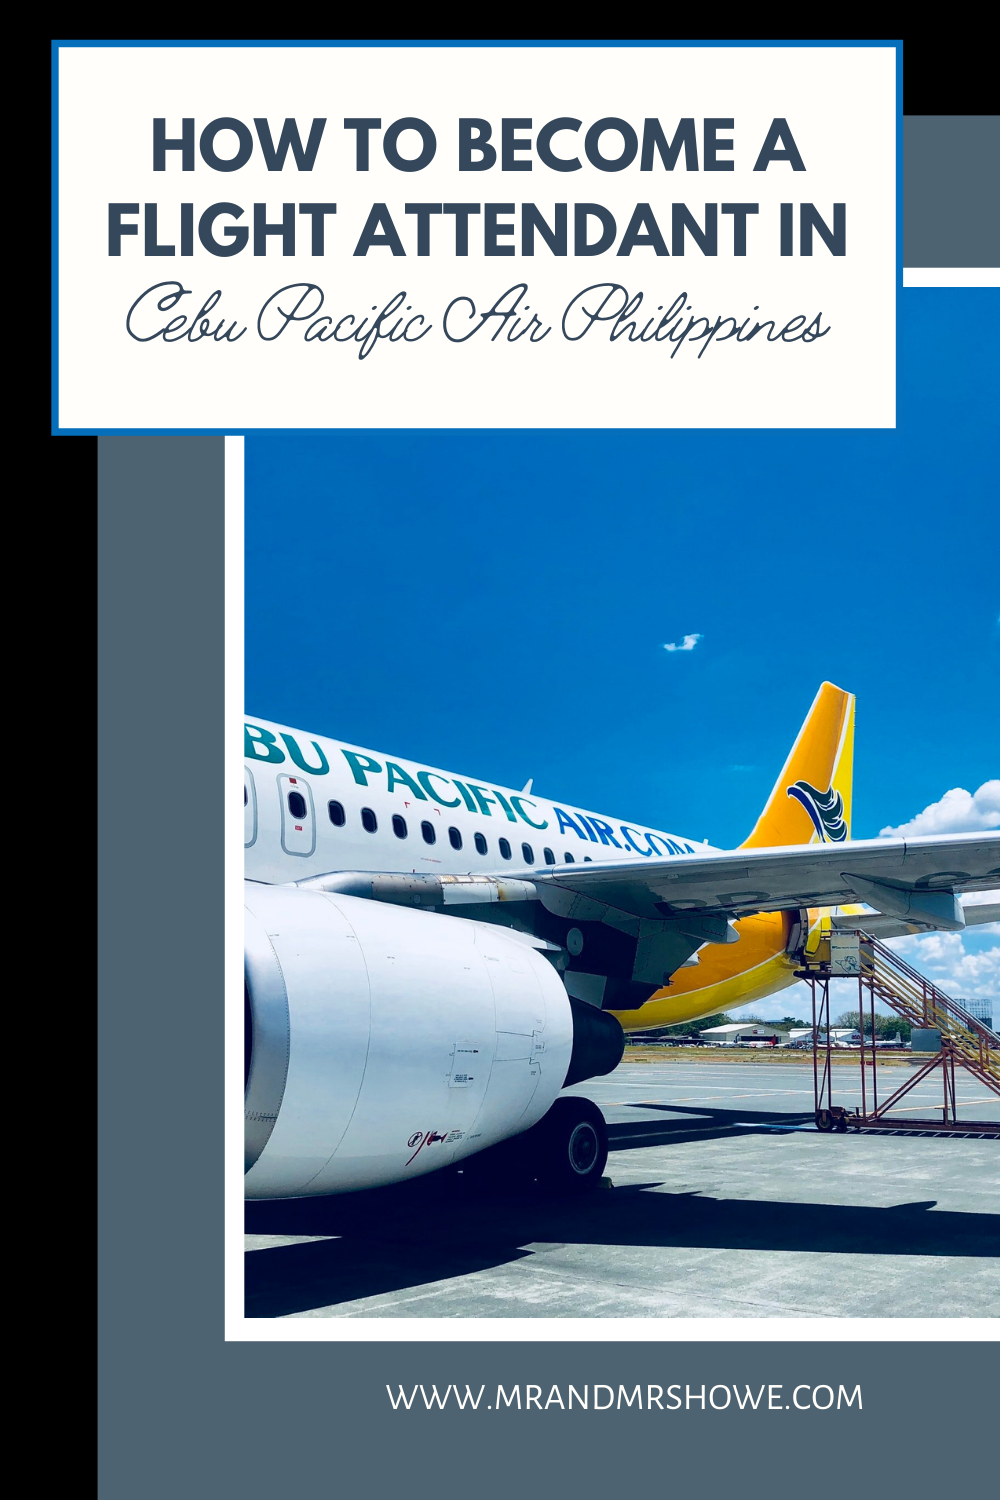 How to Become a Flight Attendant in Cebu Pacific Air Philippines [Cabin Crew Tips for Cebu Pacific]1.png